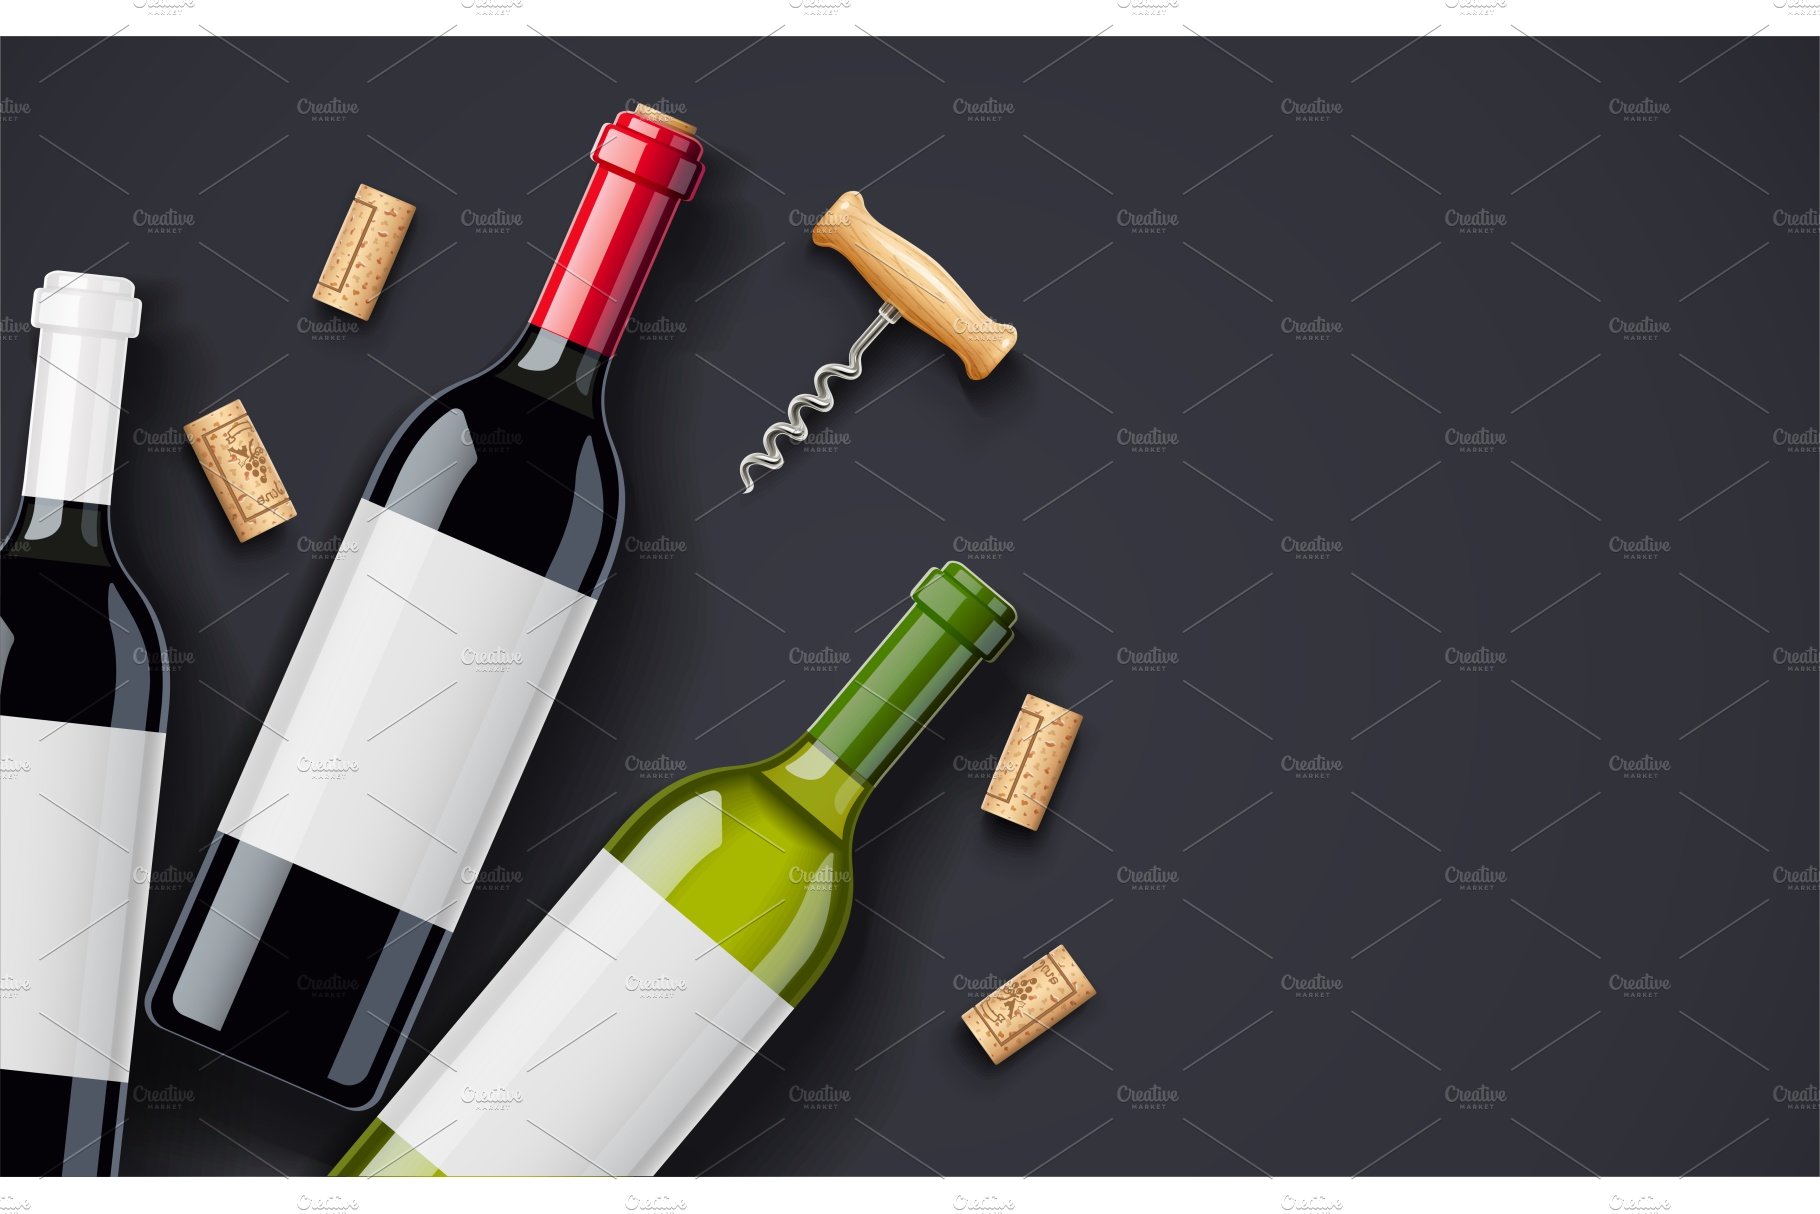 Red Wine bottle, cork and corkscrew cover image.